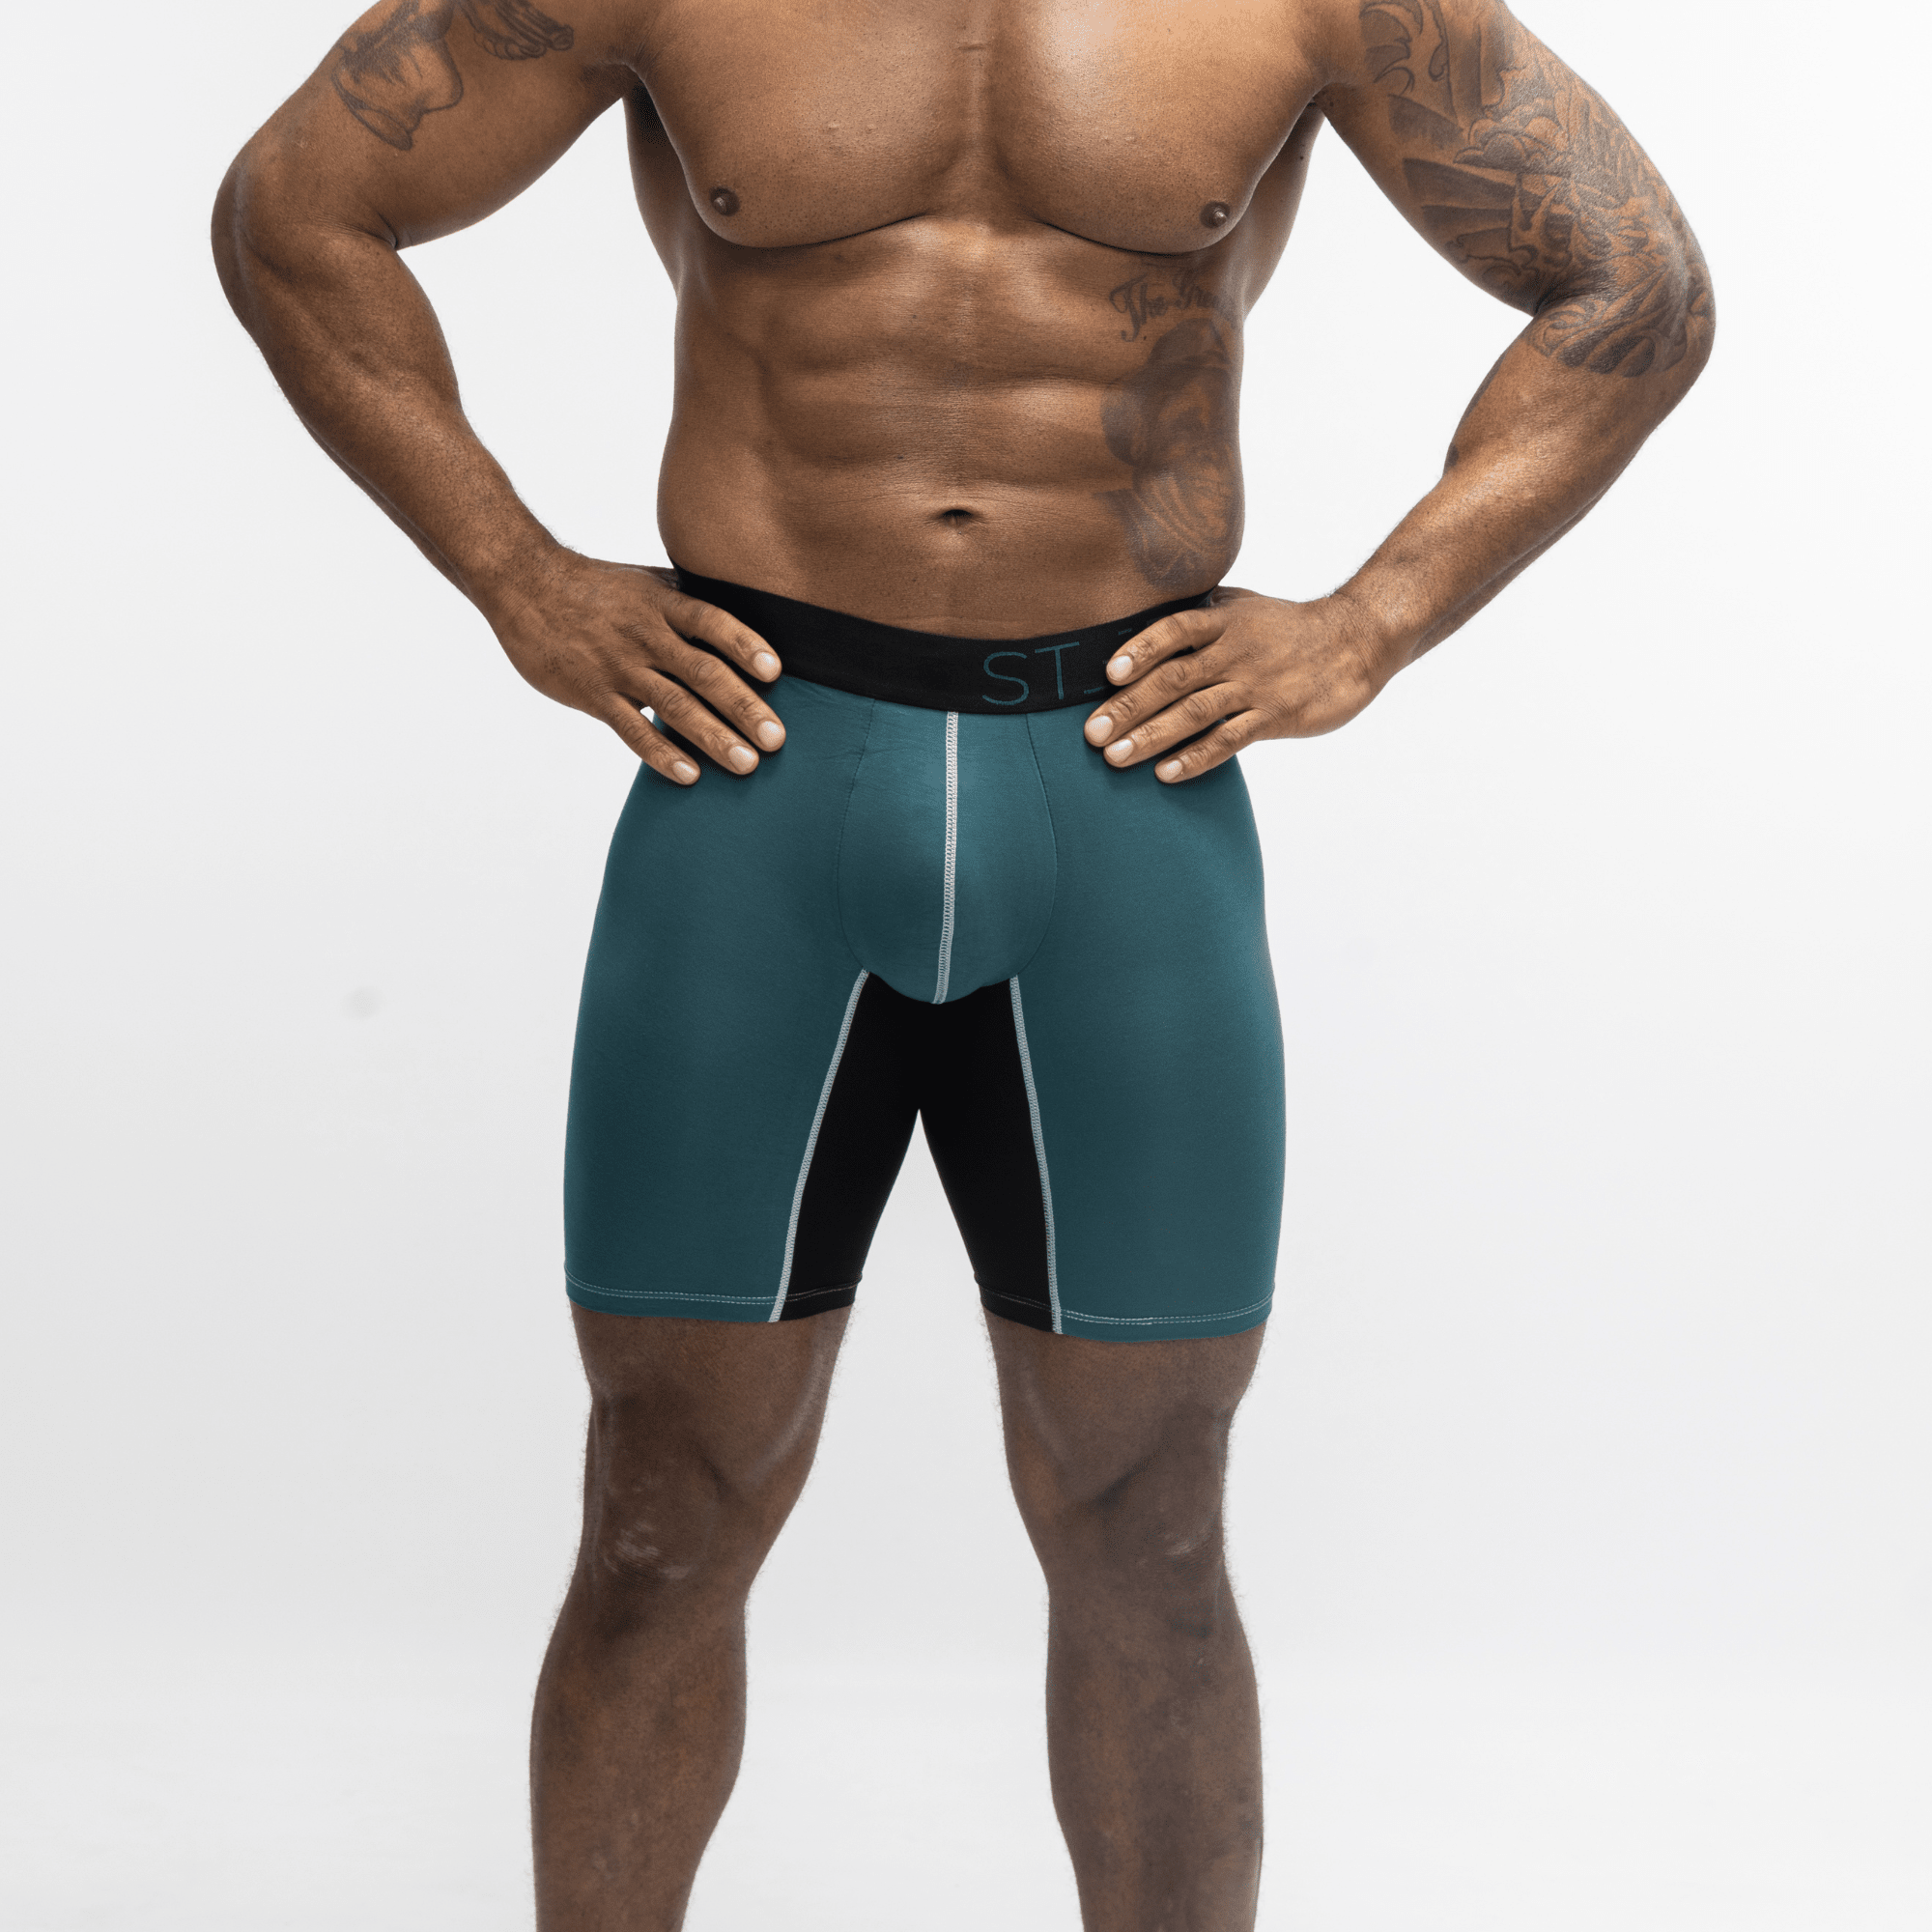 OPTIMUM GALLERY Fitness Fighter Frenchie Gym Supporter Underwear Hip  Support Supporter - Buy OPTIMUM GALLERY Fitness Fighter Frenchie Gym  Supporter Underwear Hip Support Supporter Online at Best Prices in India -  Fitness